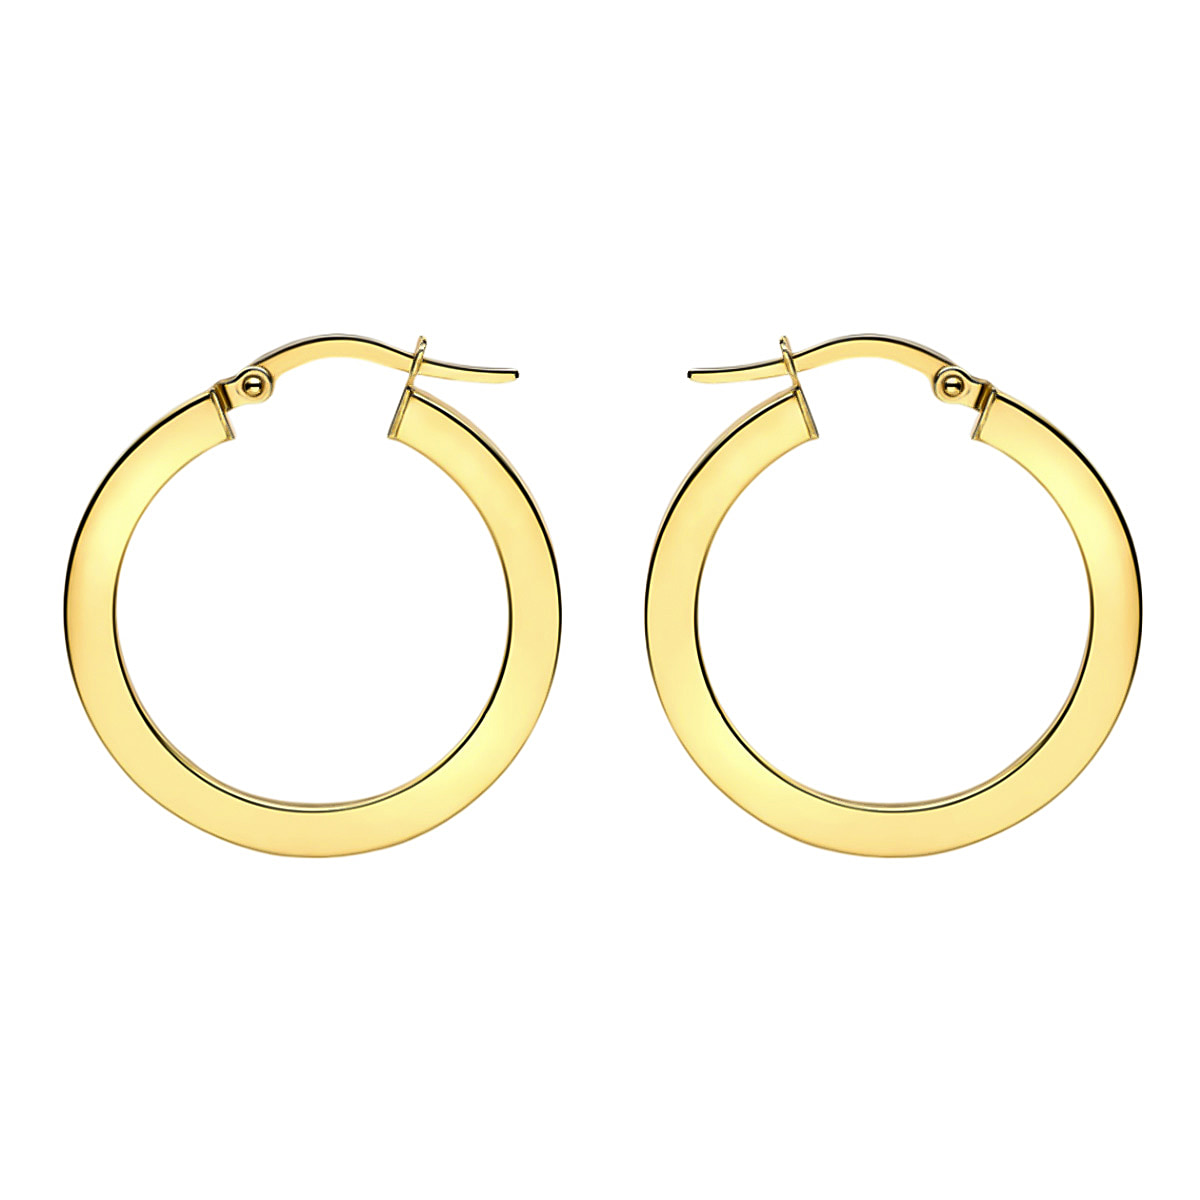 Vicenza Closeout Deal - 9K Yellow Gold Flat Hoop Earrings